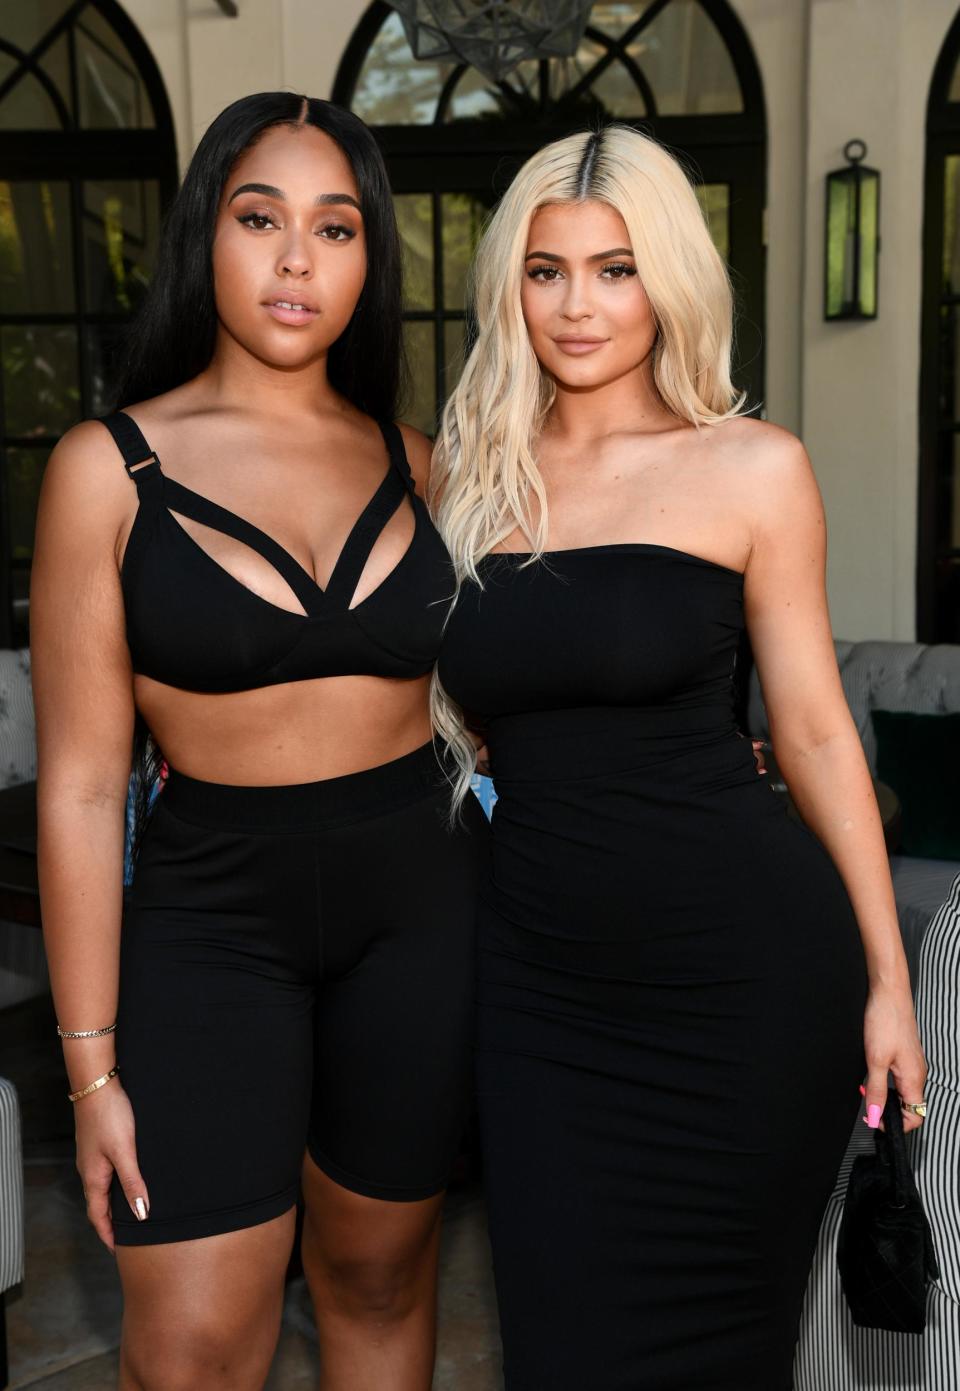 Best friends: Kylie Jenner and Jordyn Woods were torn apart by recent scandal (Getty Images for SECNDNTURE)